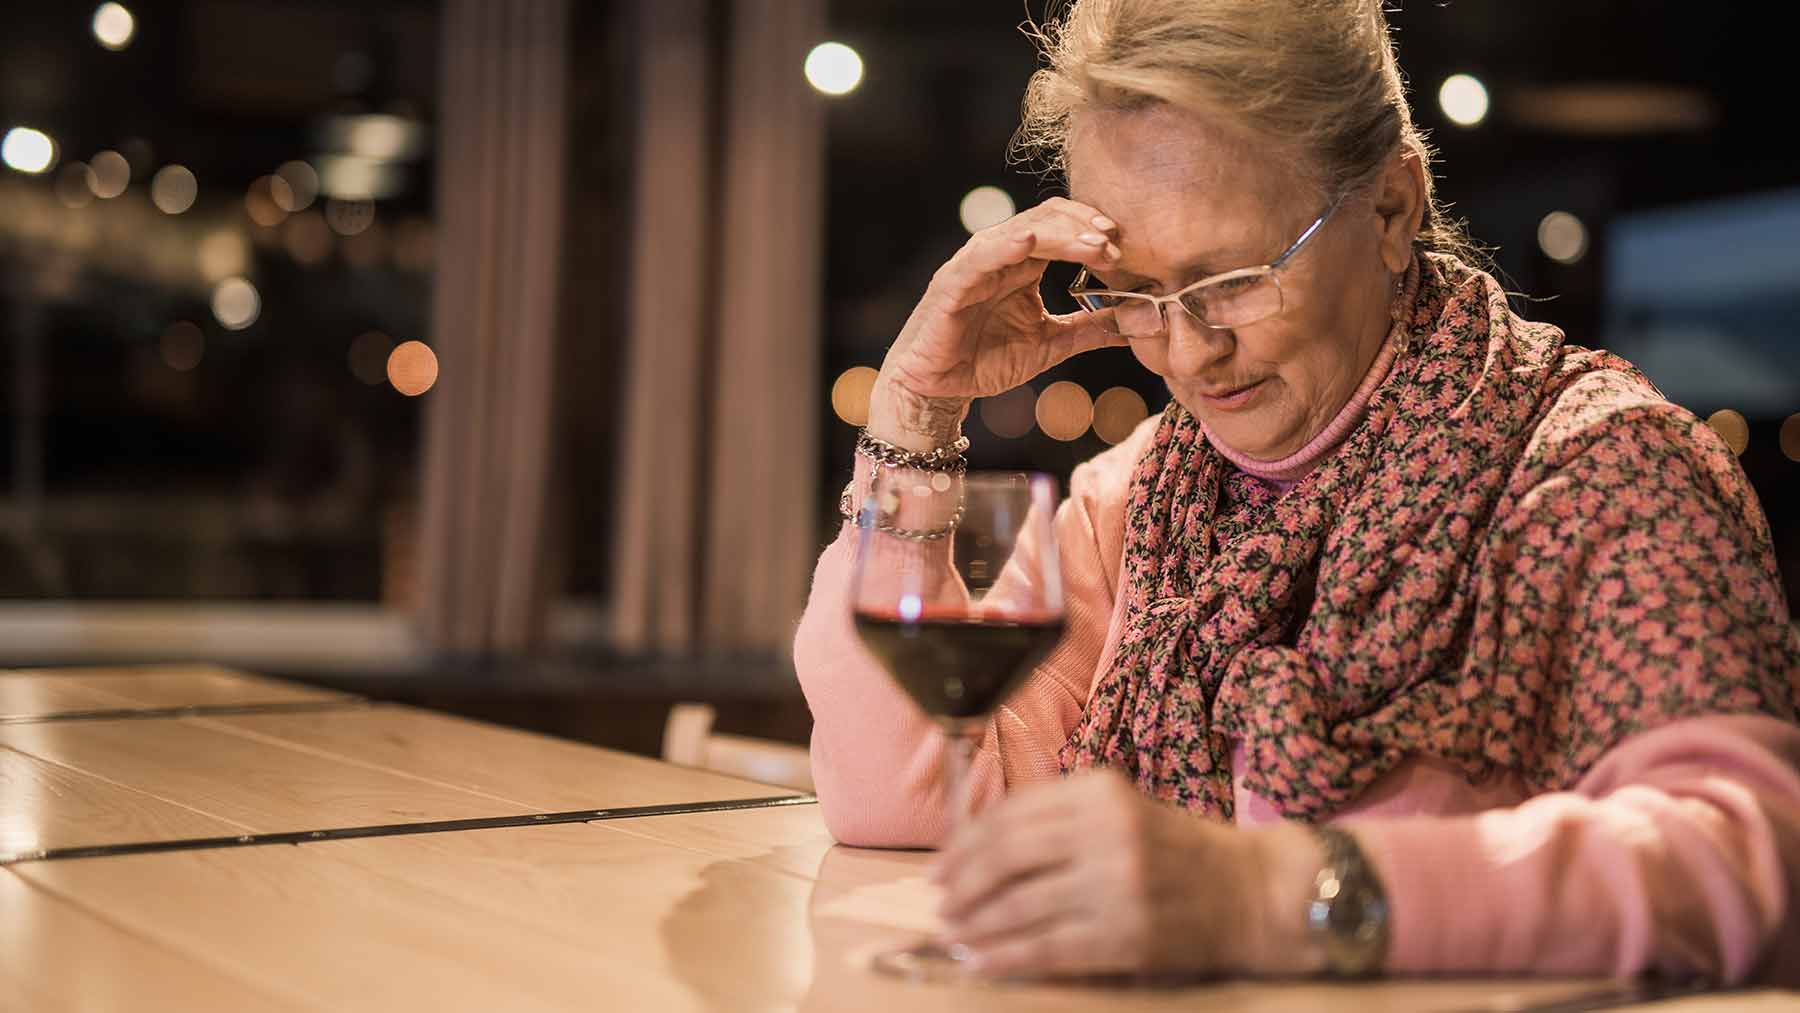 Newswise: How Does Social Drinking Become Problematic as We Age?